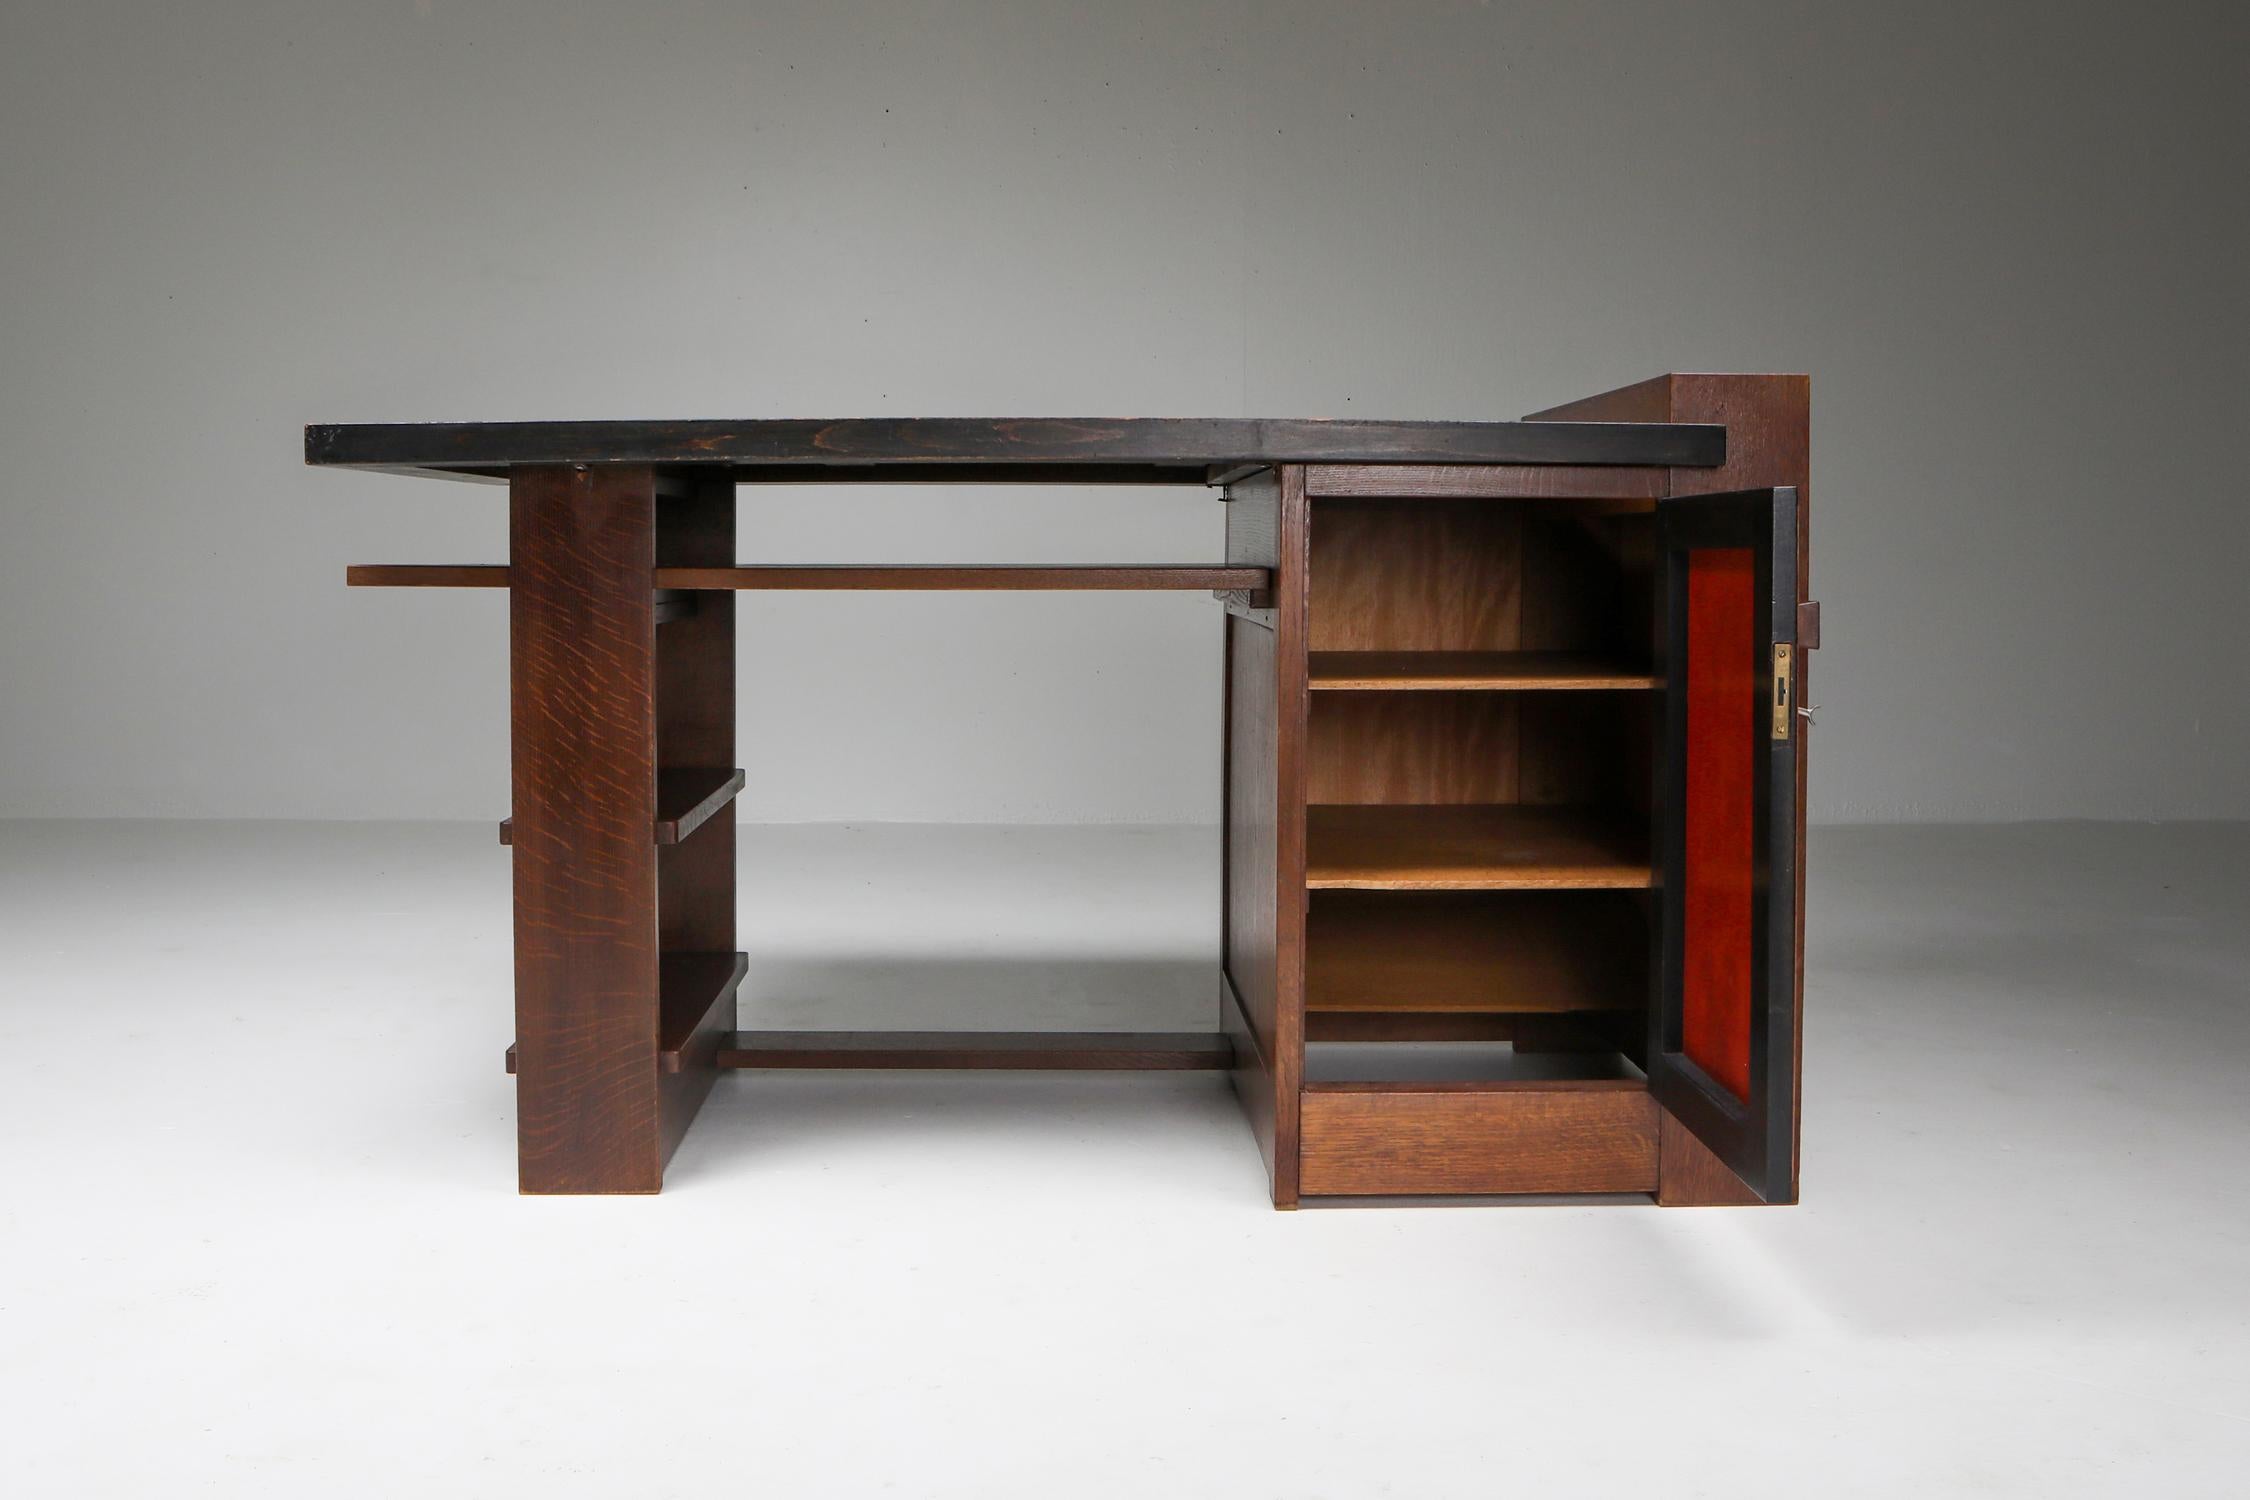 Mid-20th Century Modernist Desk by Frits Spanjaard, Wouda Inspired, Netherlands, 1930s For Sale